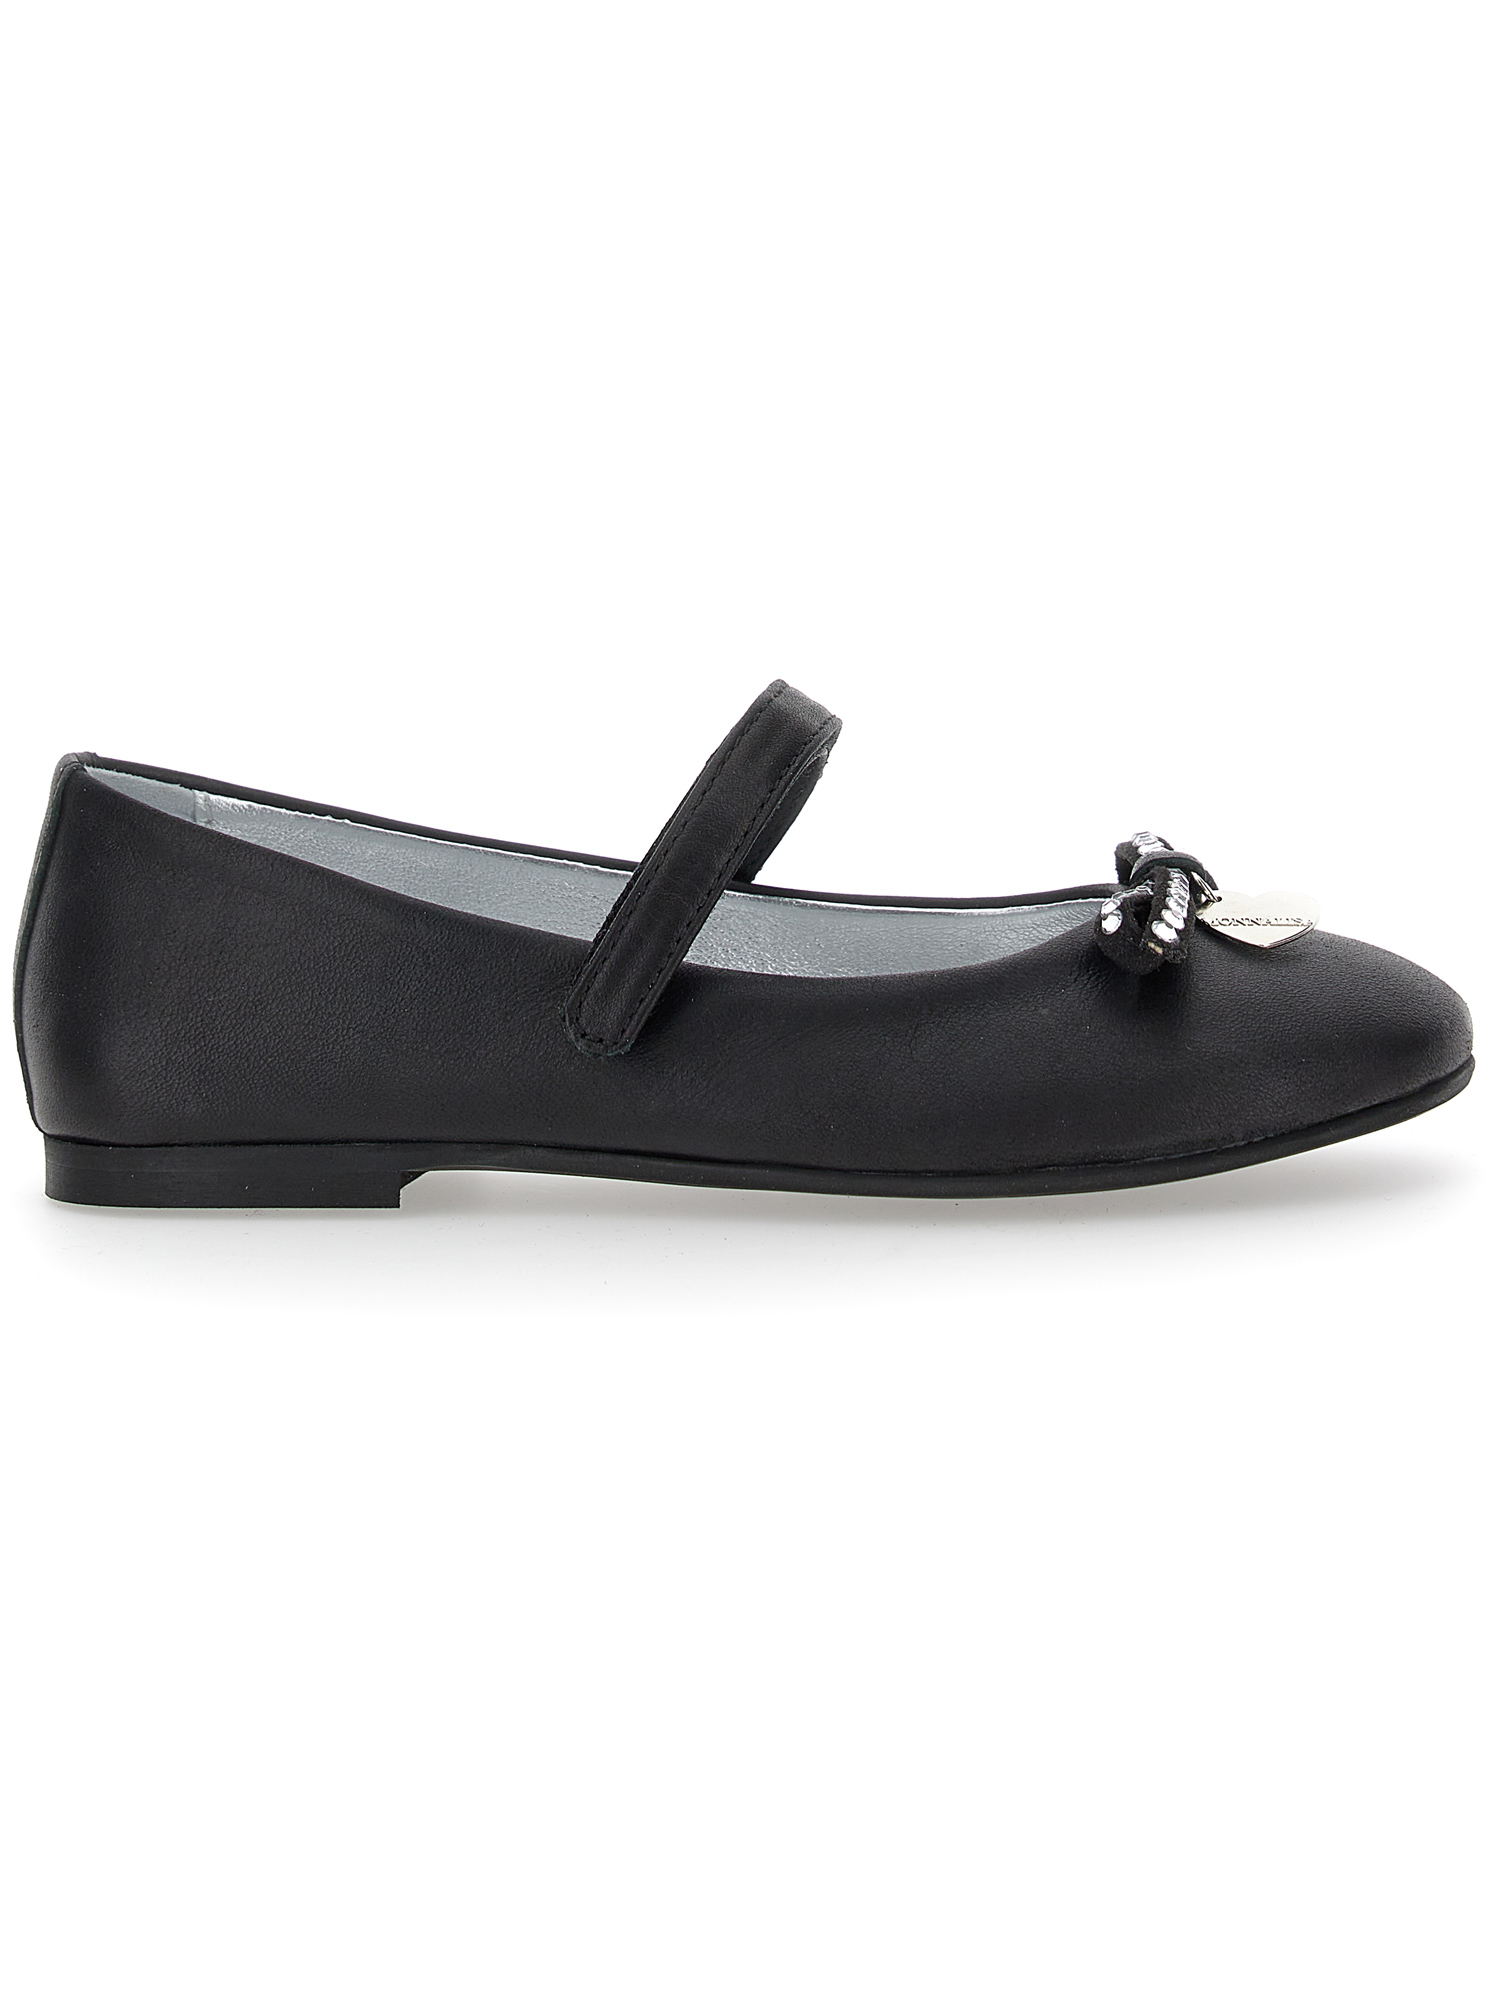 Monnalisa Leather Ballet Flats With Rhinestone Bow In Black